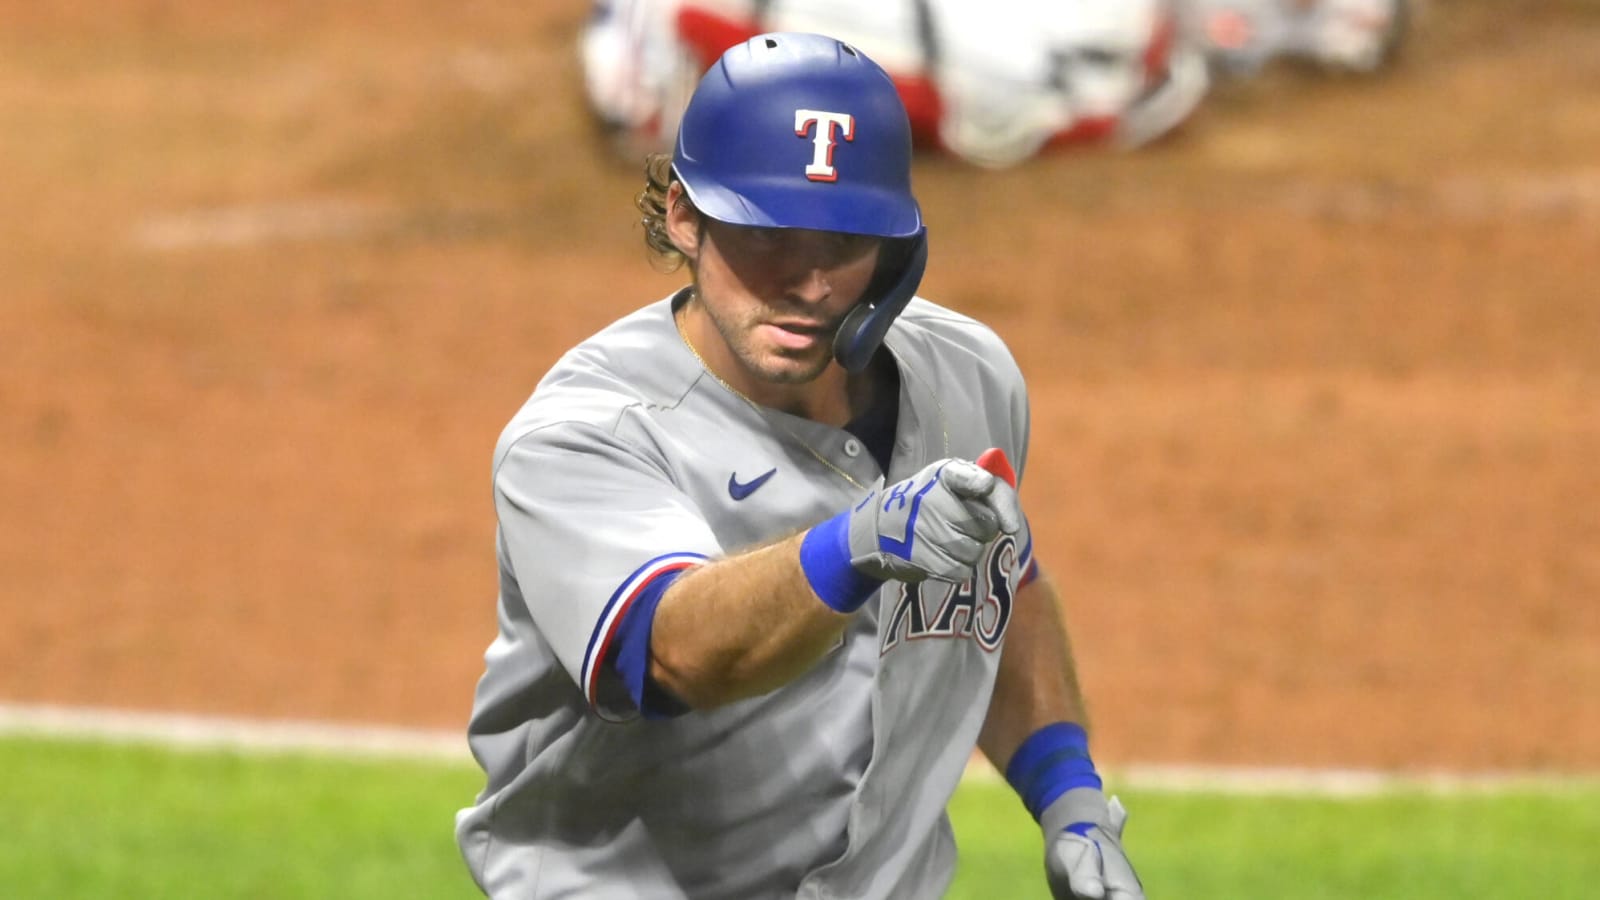 Rangers sign outfielder-turned pitcher to minors deal